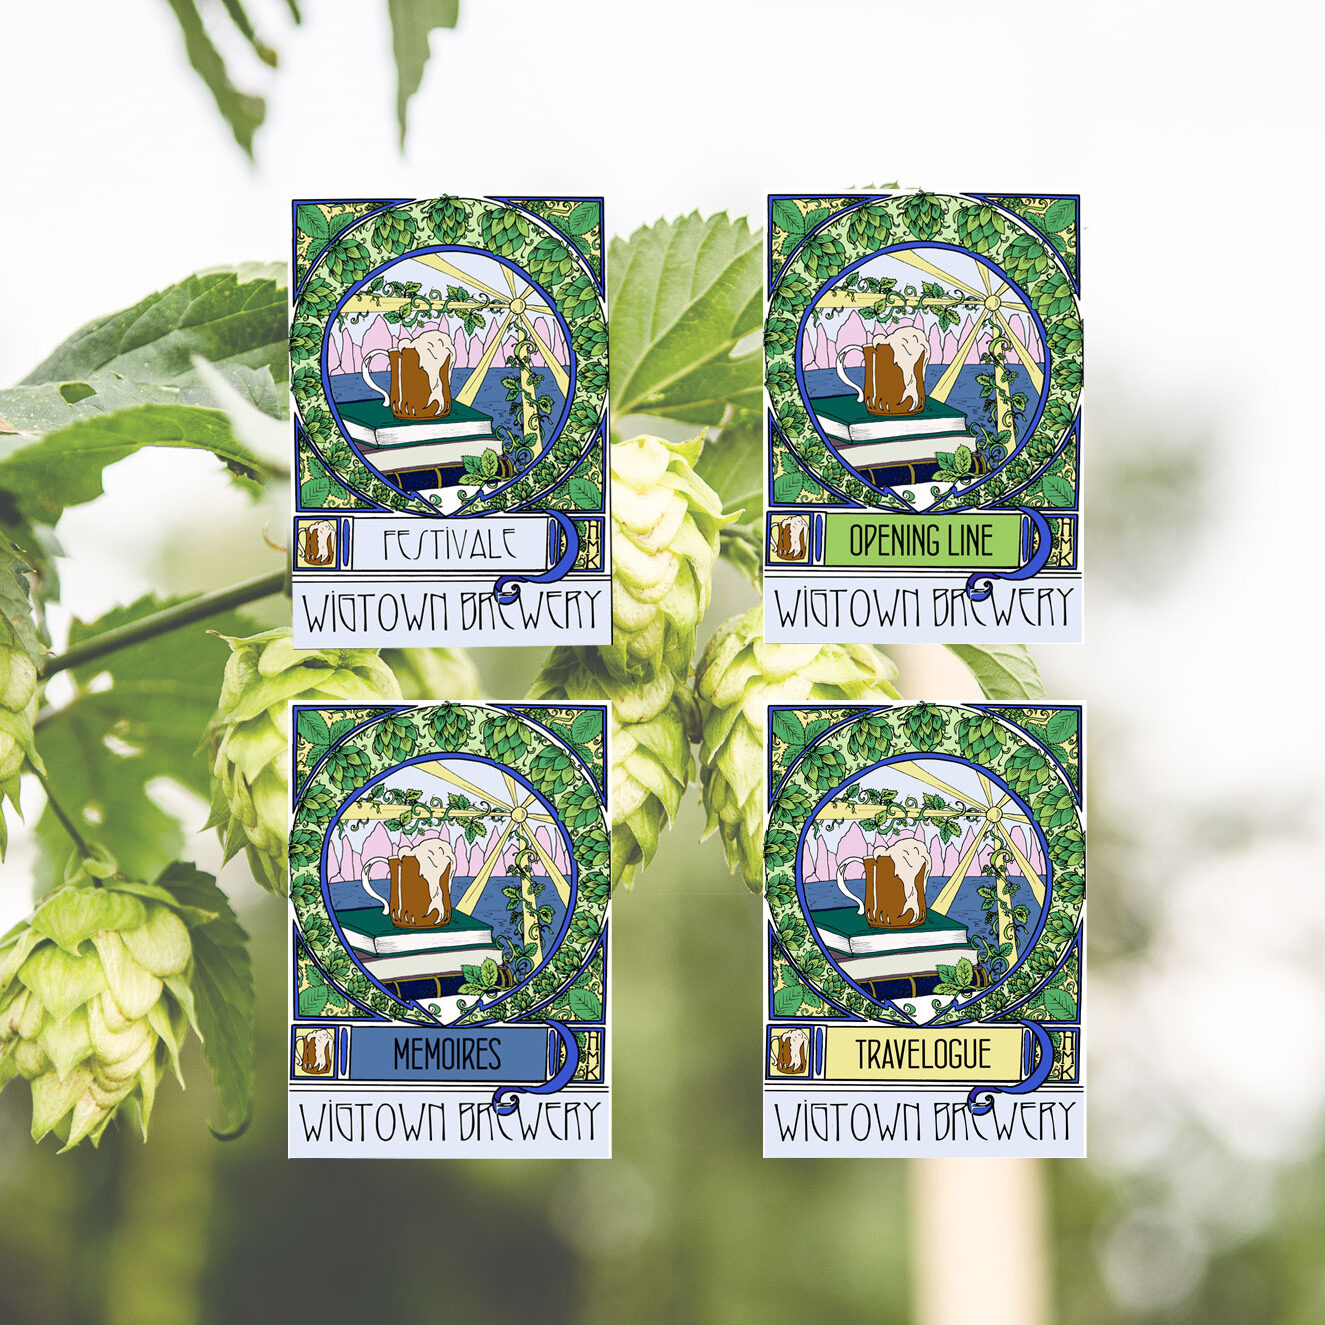 Blurred image of hops with Beer Bottle labels in front